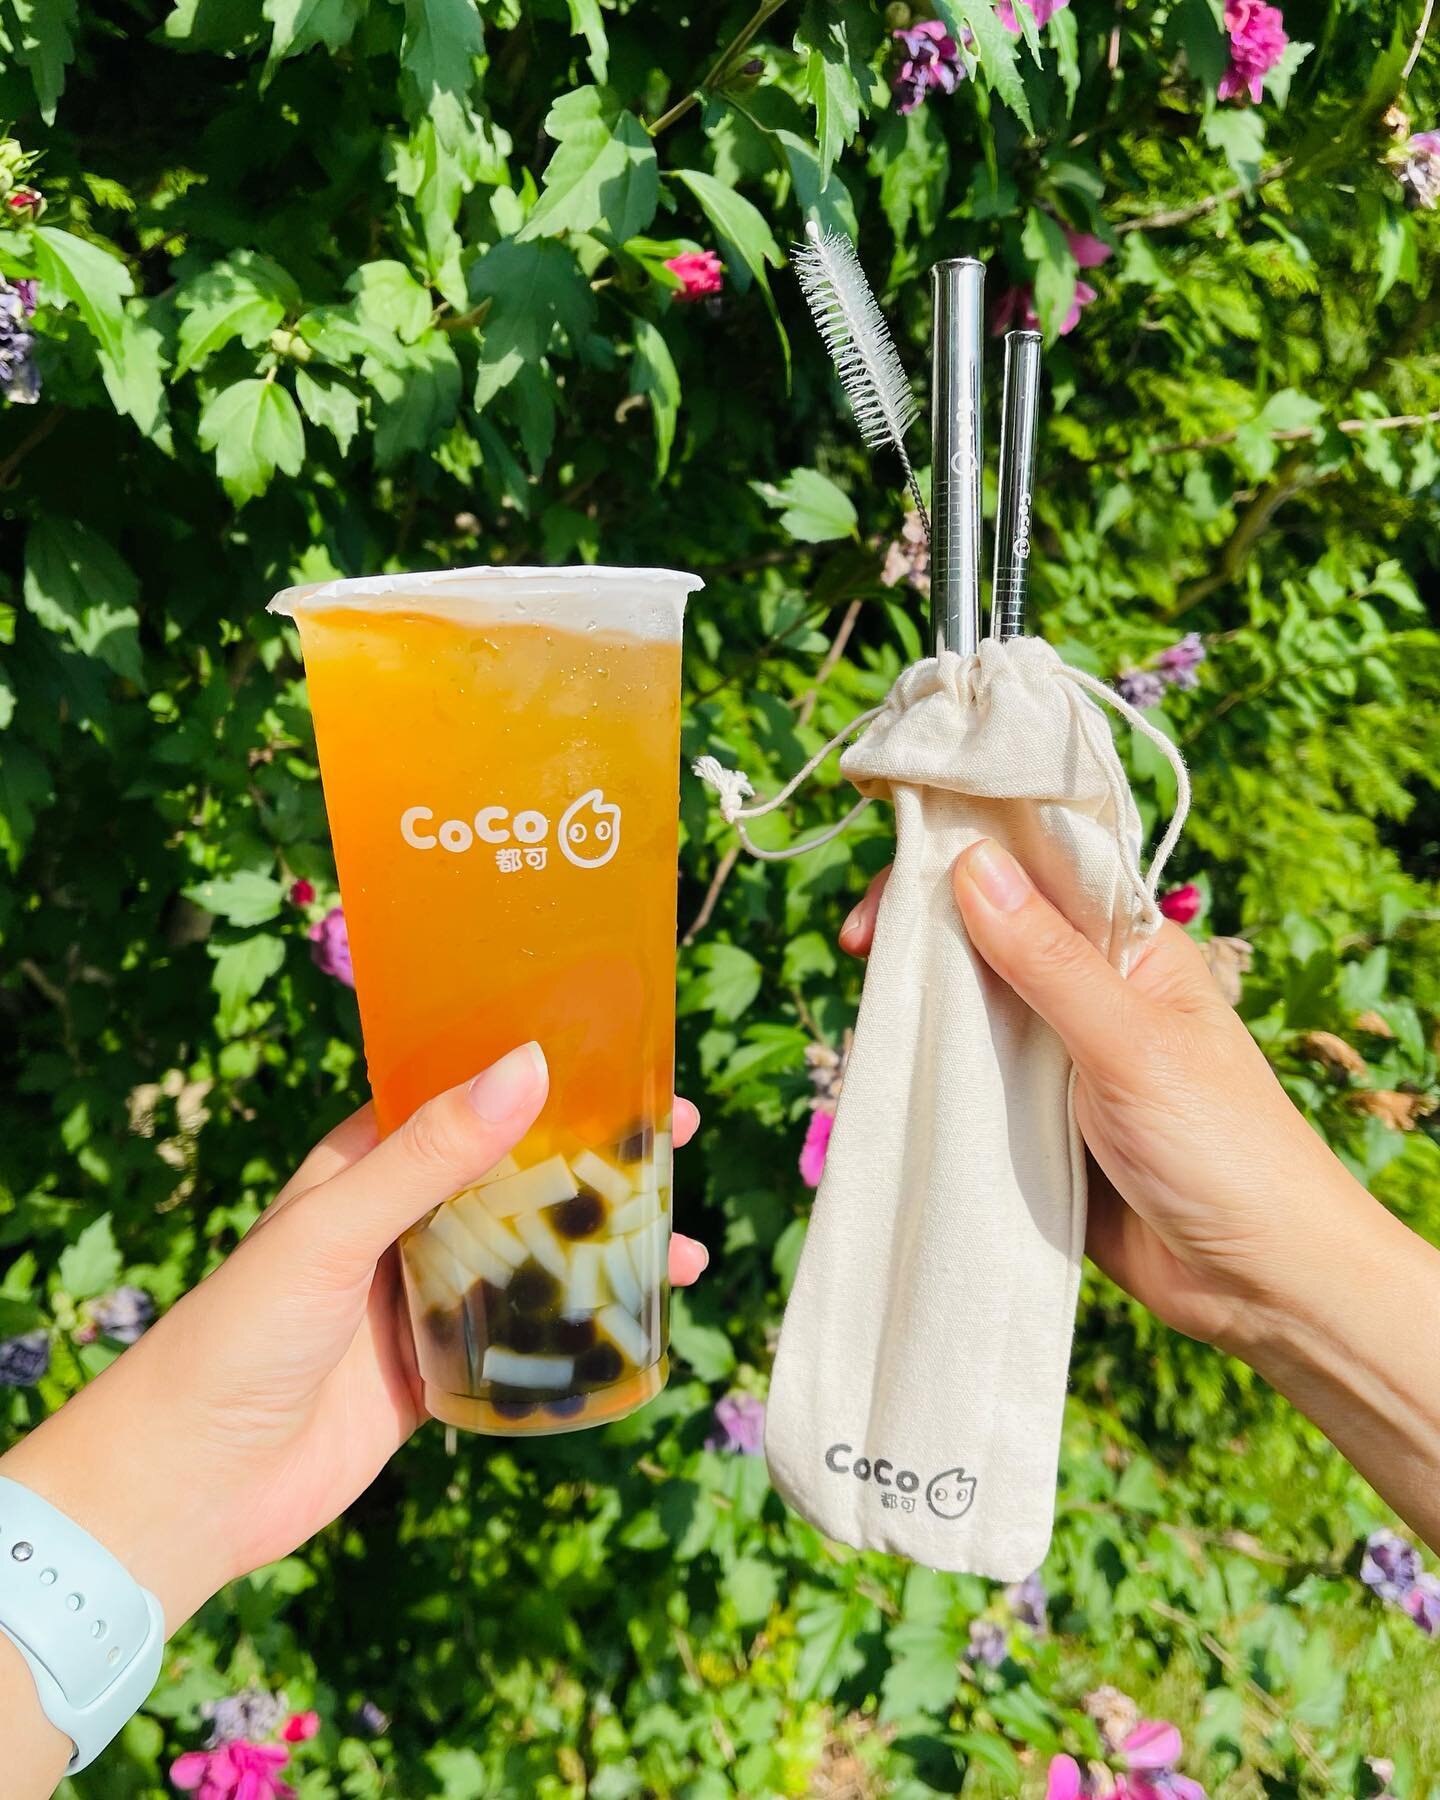 Purchase our CoCo Reusable Straw before it&rsquo;s gone! 🍃⠀
⠀
{$1 off when you purchase from our app}⠀
⠀
#cocofreshteaandjuice #reusablestraw #ecofriendly #reusable #earth #gogreen #reuse #plasticfree #tea #healthyliving #liveyourbestlife #boba #bub